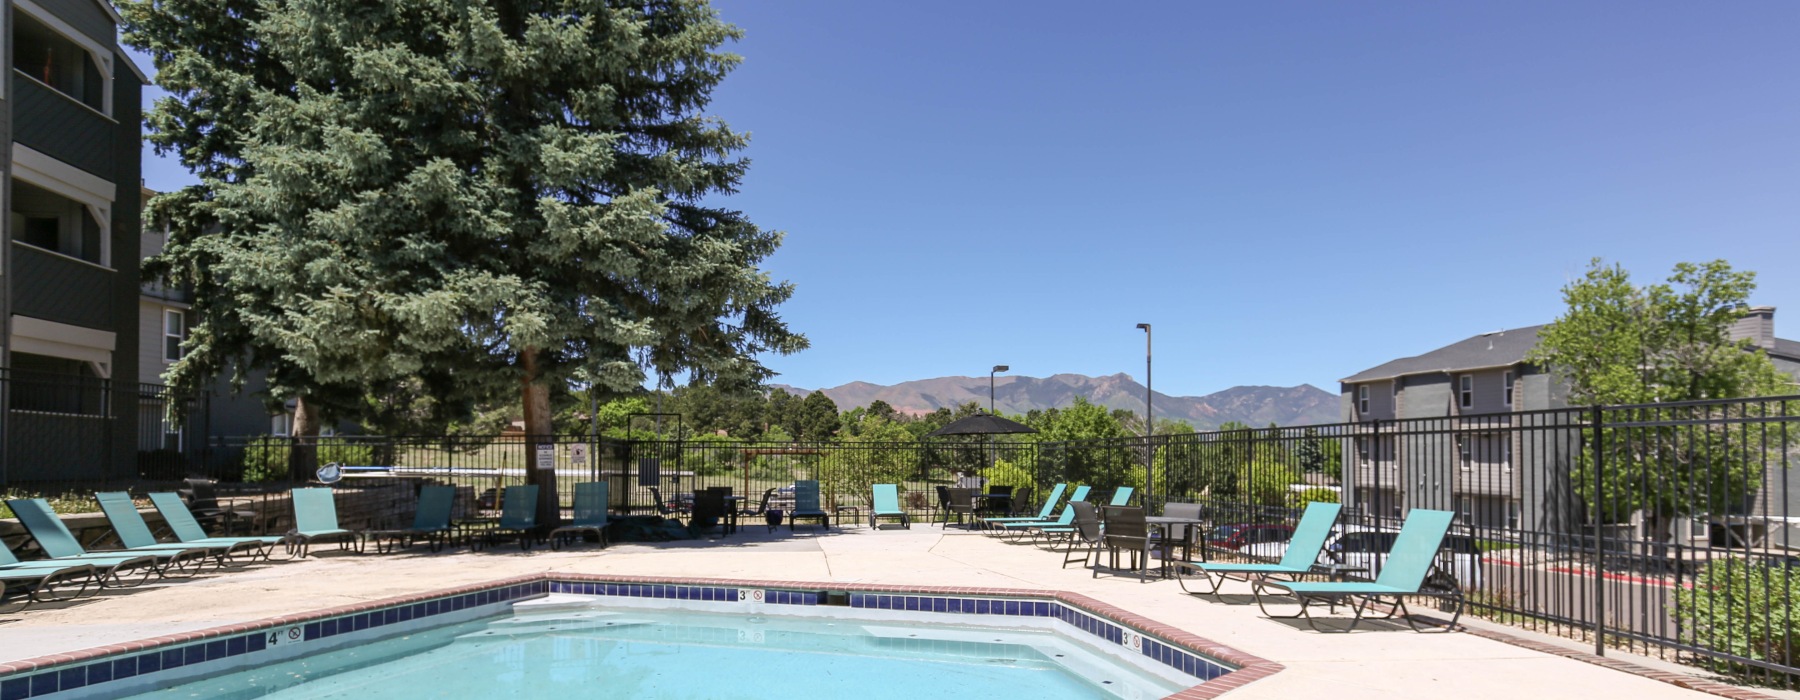 Pool with sundeck facing the mountains and trees